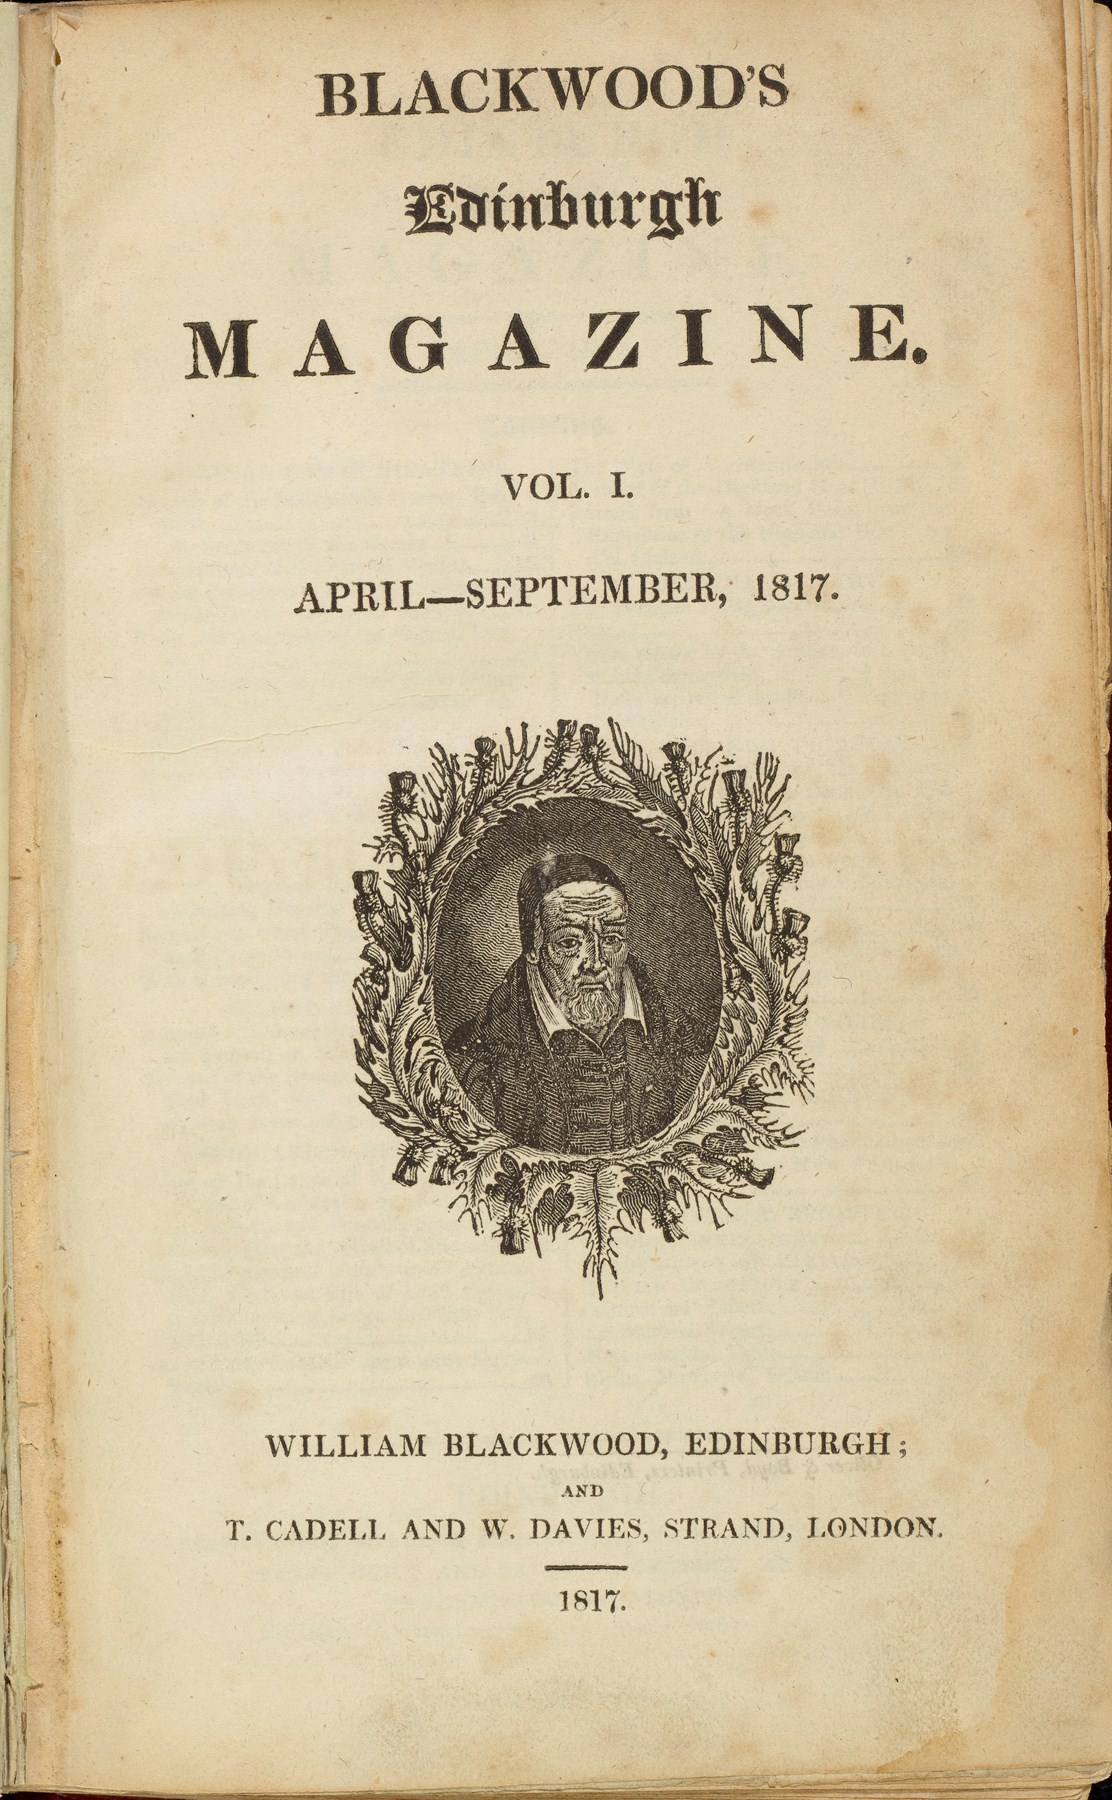 First issue of Blackwood's magazine